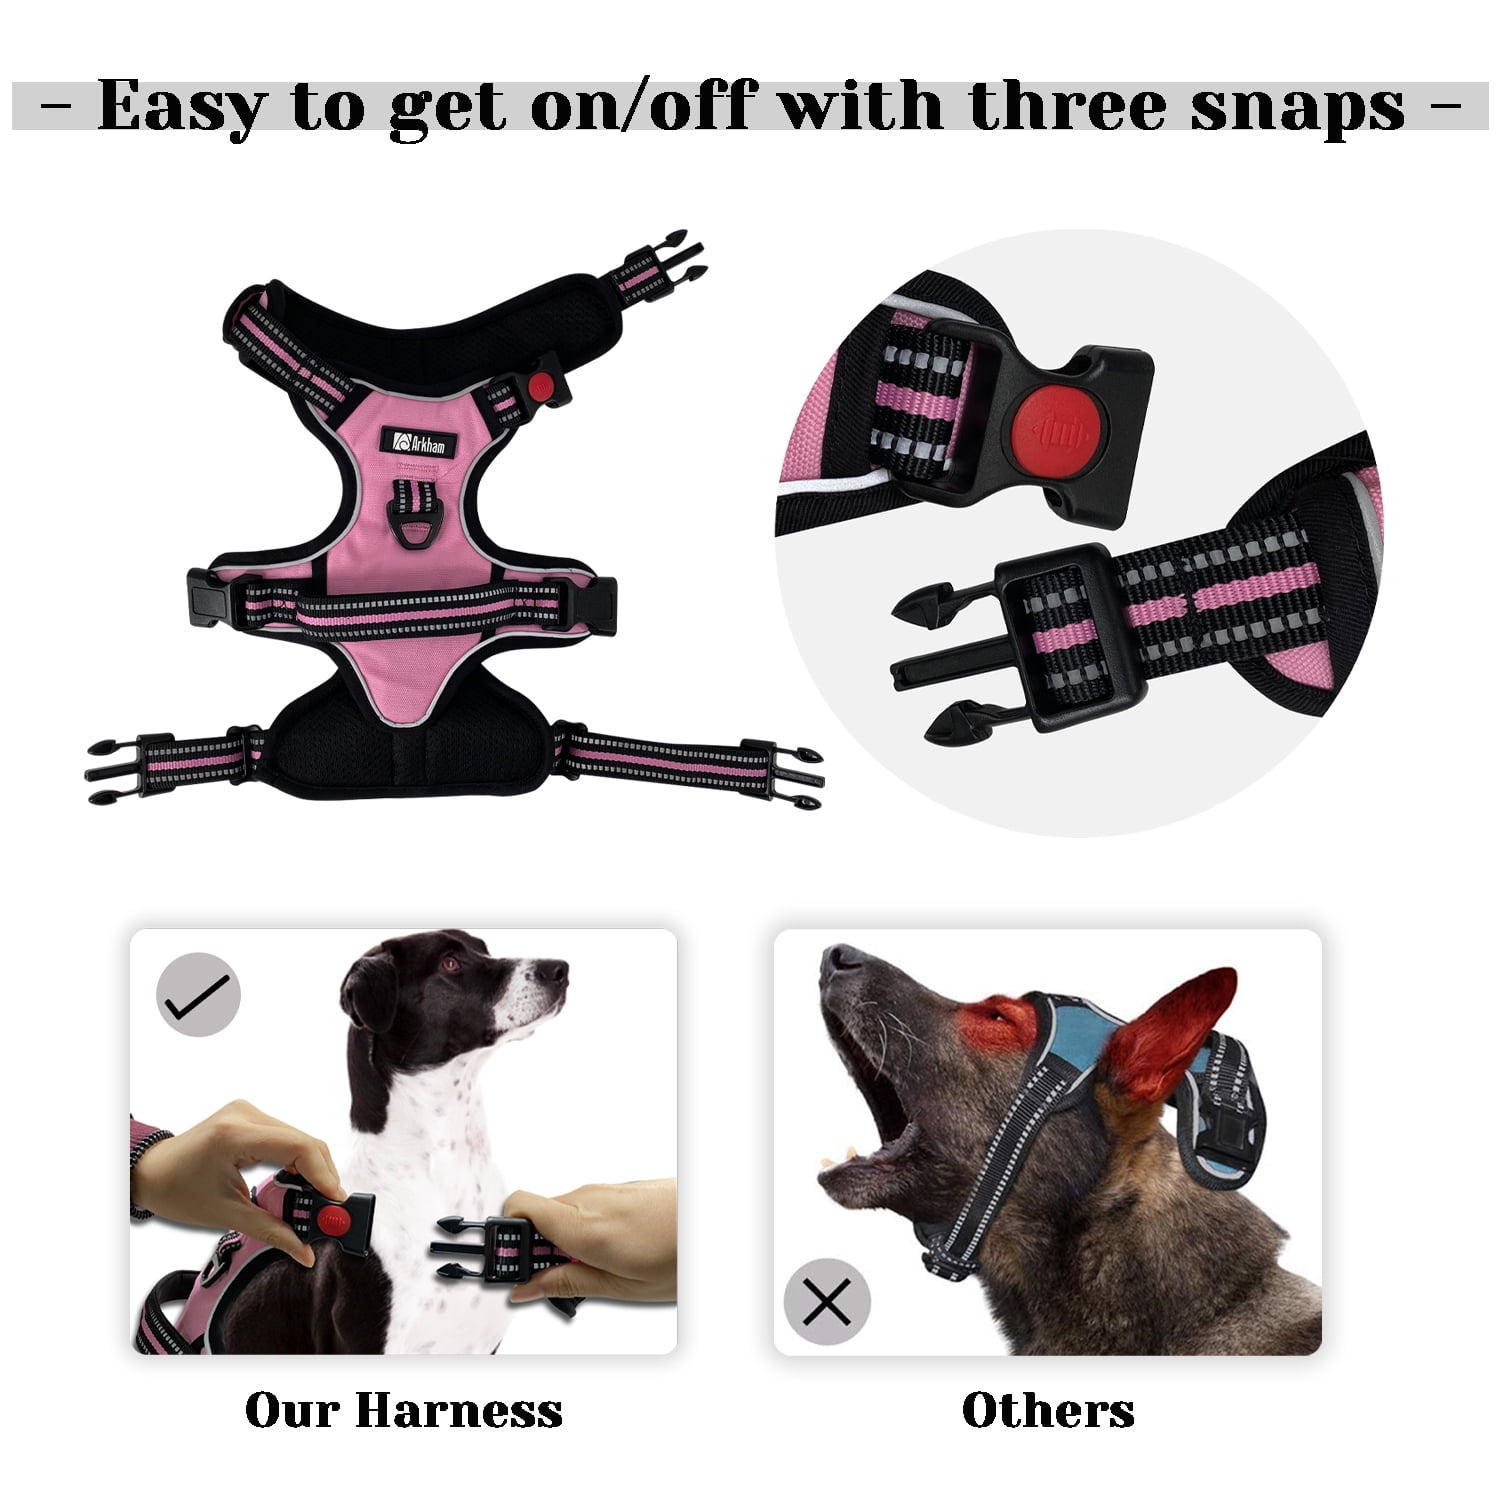 Frenchiestore Vet Approved Dog Harness No-Pull Pet Harness Pet Vest Easy Control for Medium Small Large Dogs Front Leading Harness | Livin' La Vida